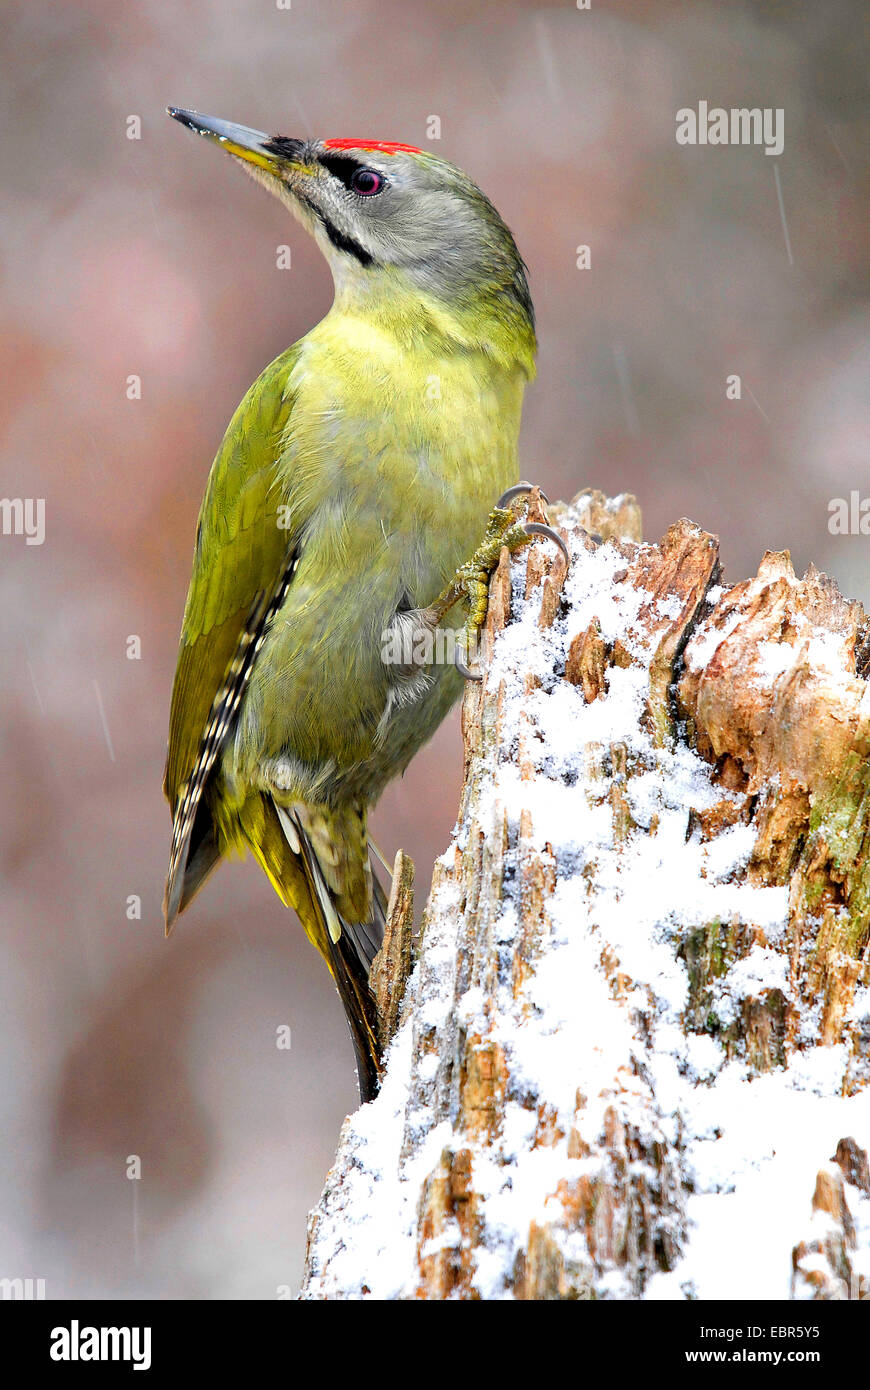 grey-faced woodpecker (Picus canus), sits on a snow covered tree snag, Germany, Hesse Stock Photo